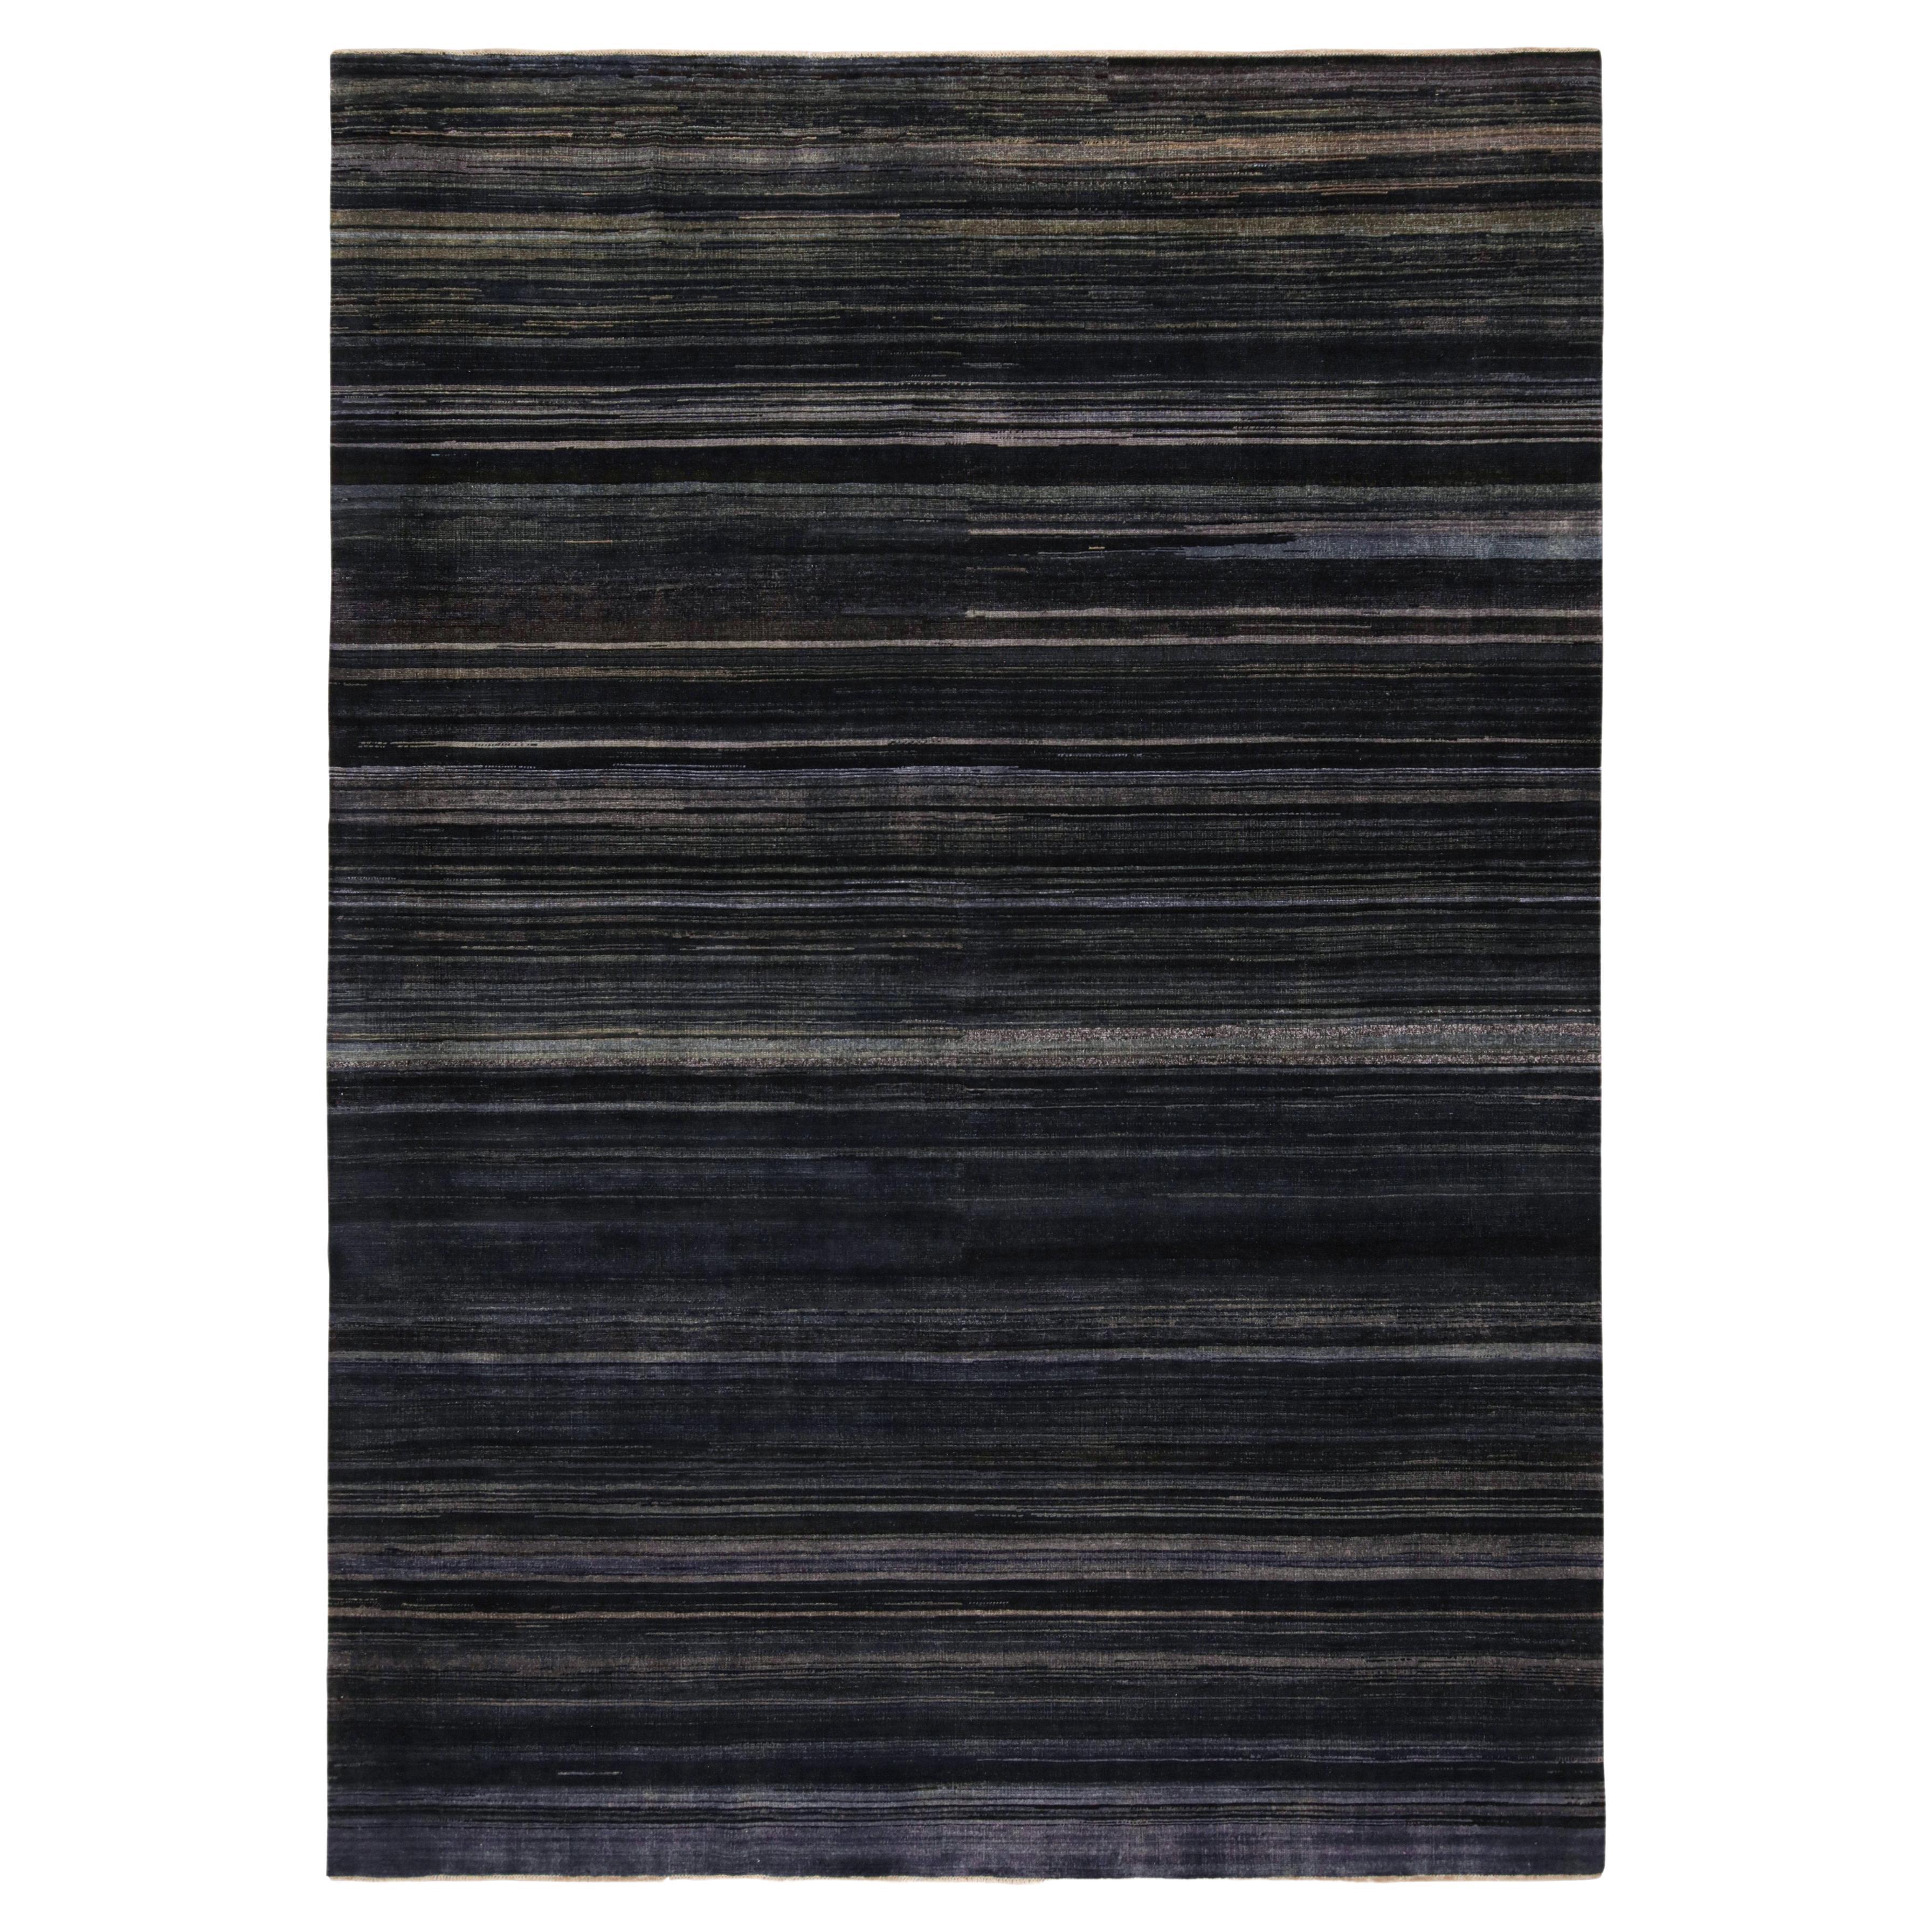 Rug & Kilim’s Modern Textural Rug in Dark Blue and Grisailles Stripes and Striae